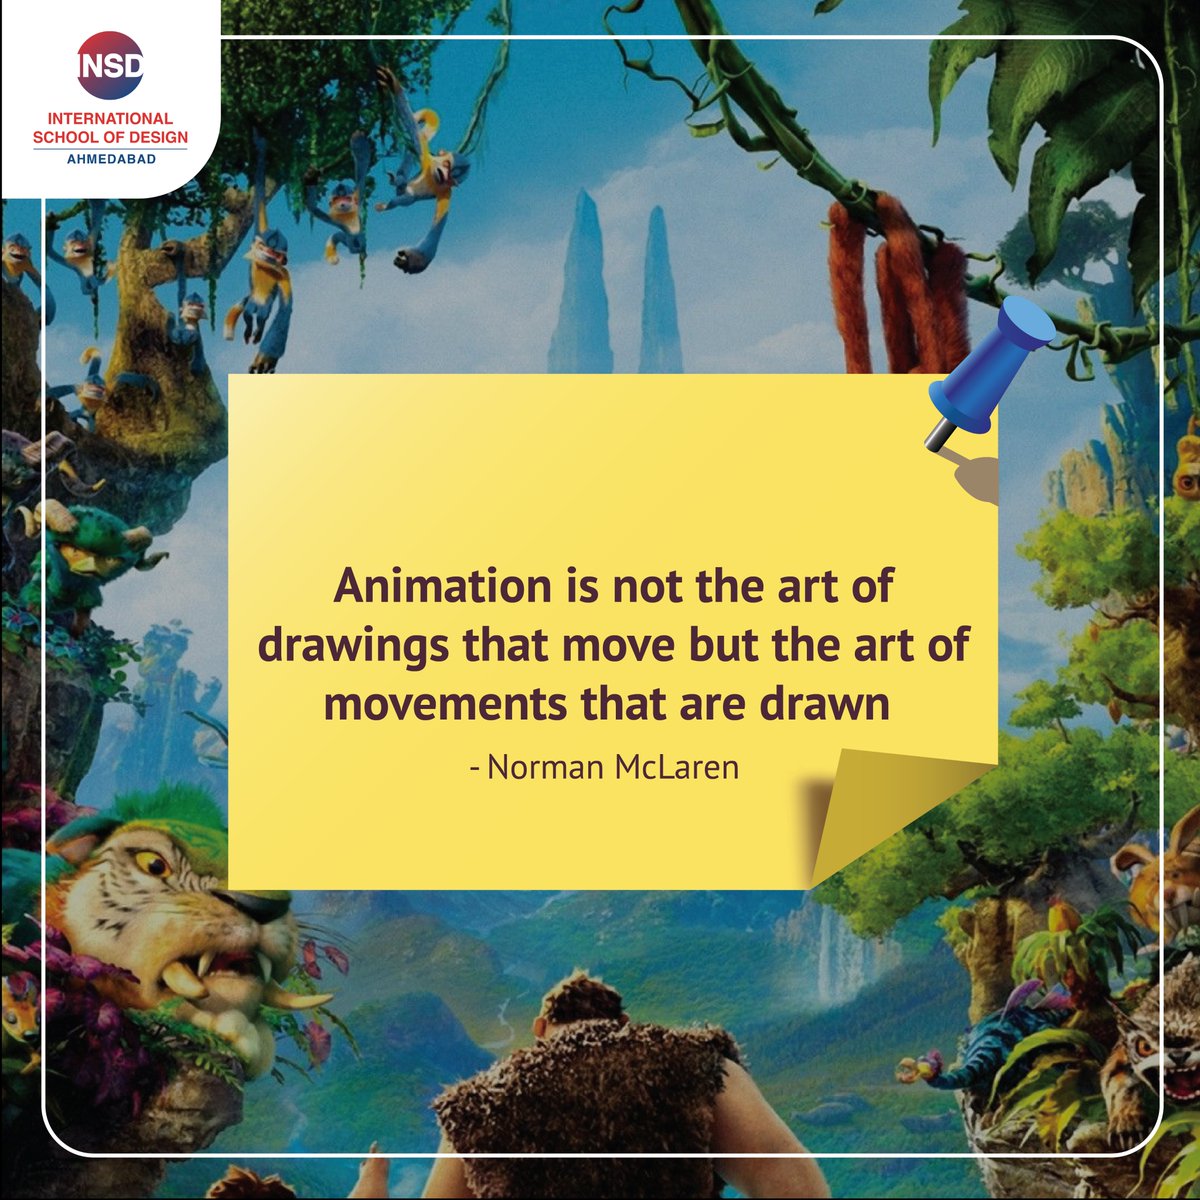 “Animation is not the art of drawings that move but the art of movements that are drawn.” - Norman McLaren

#animation #quotes #quoteoftheday #designmotivation #learnanimation #animationdesign